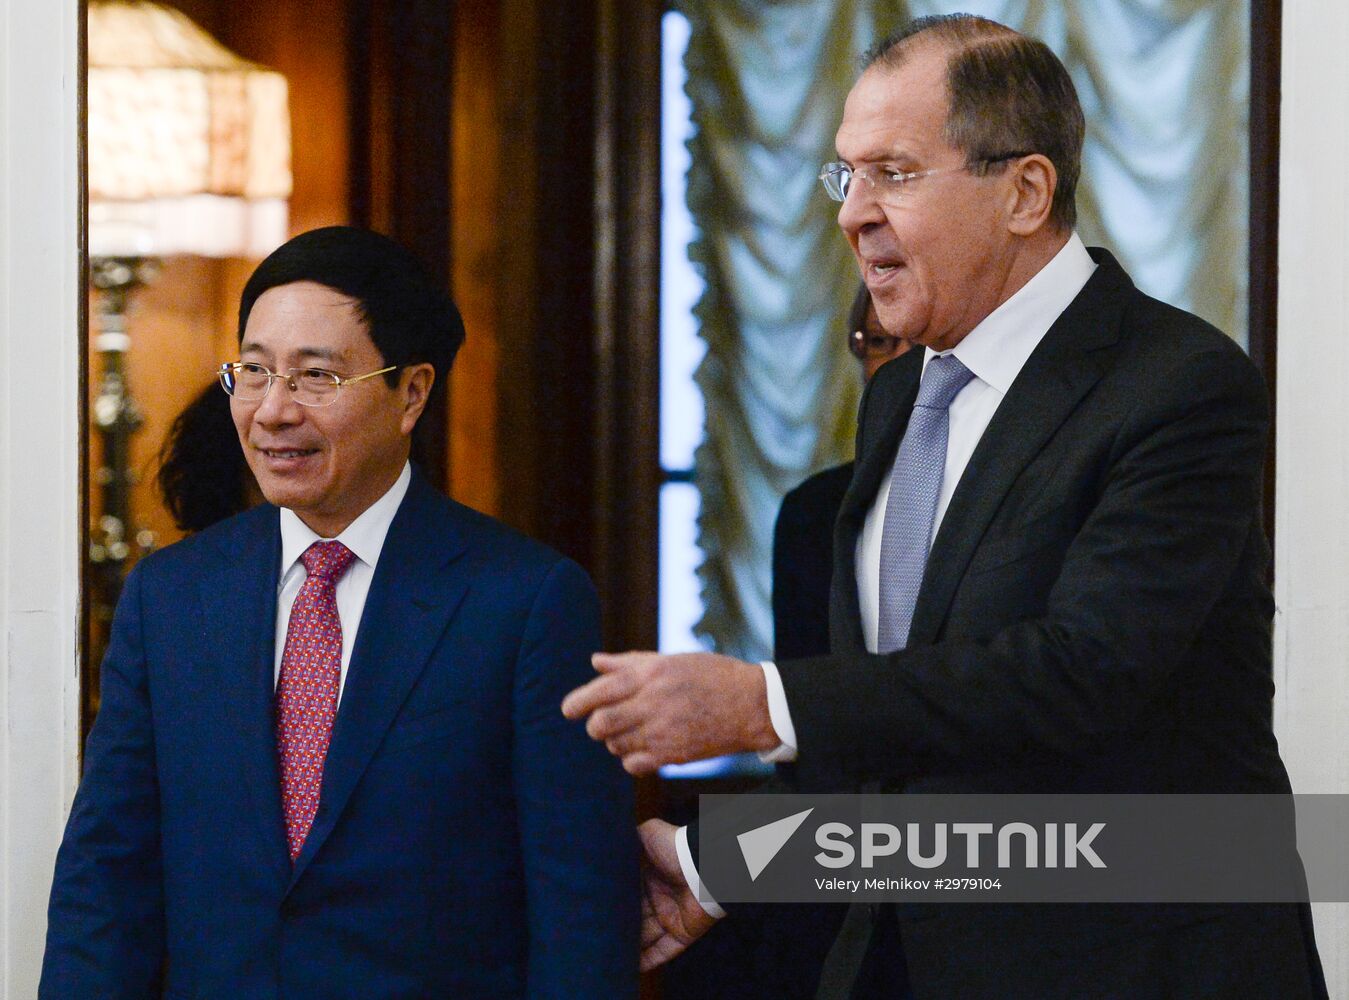 Russian Foreign Minister Sergei Lavrov meets with Foreign Minister of Vietnam Pham Binh Minh